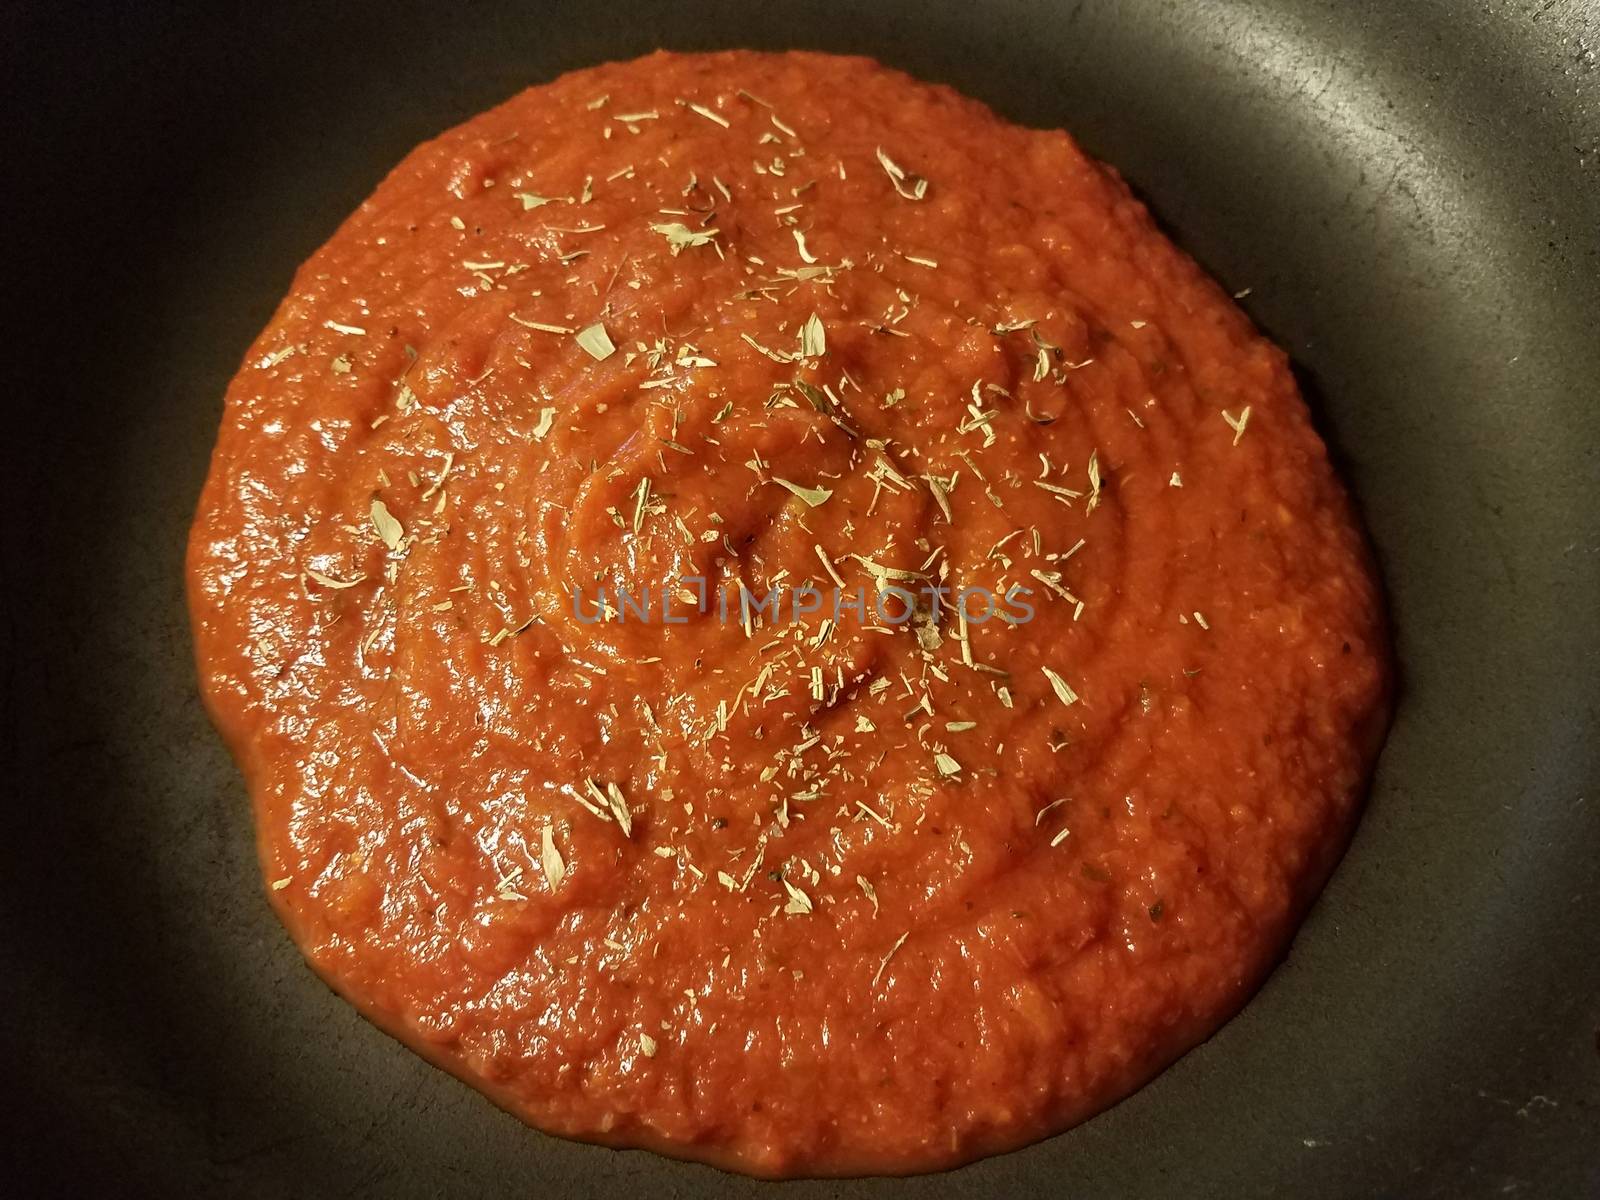 red tomato sauce in frying pan or skillet by stockphotofan1